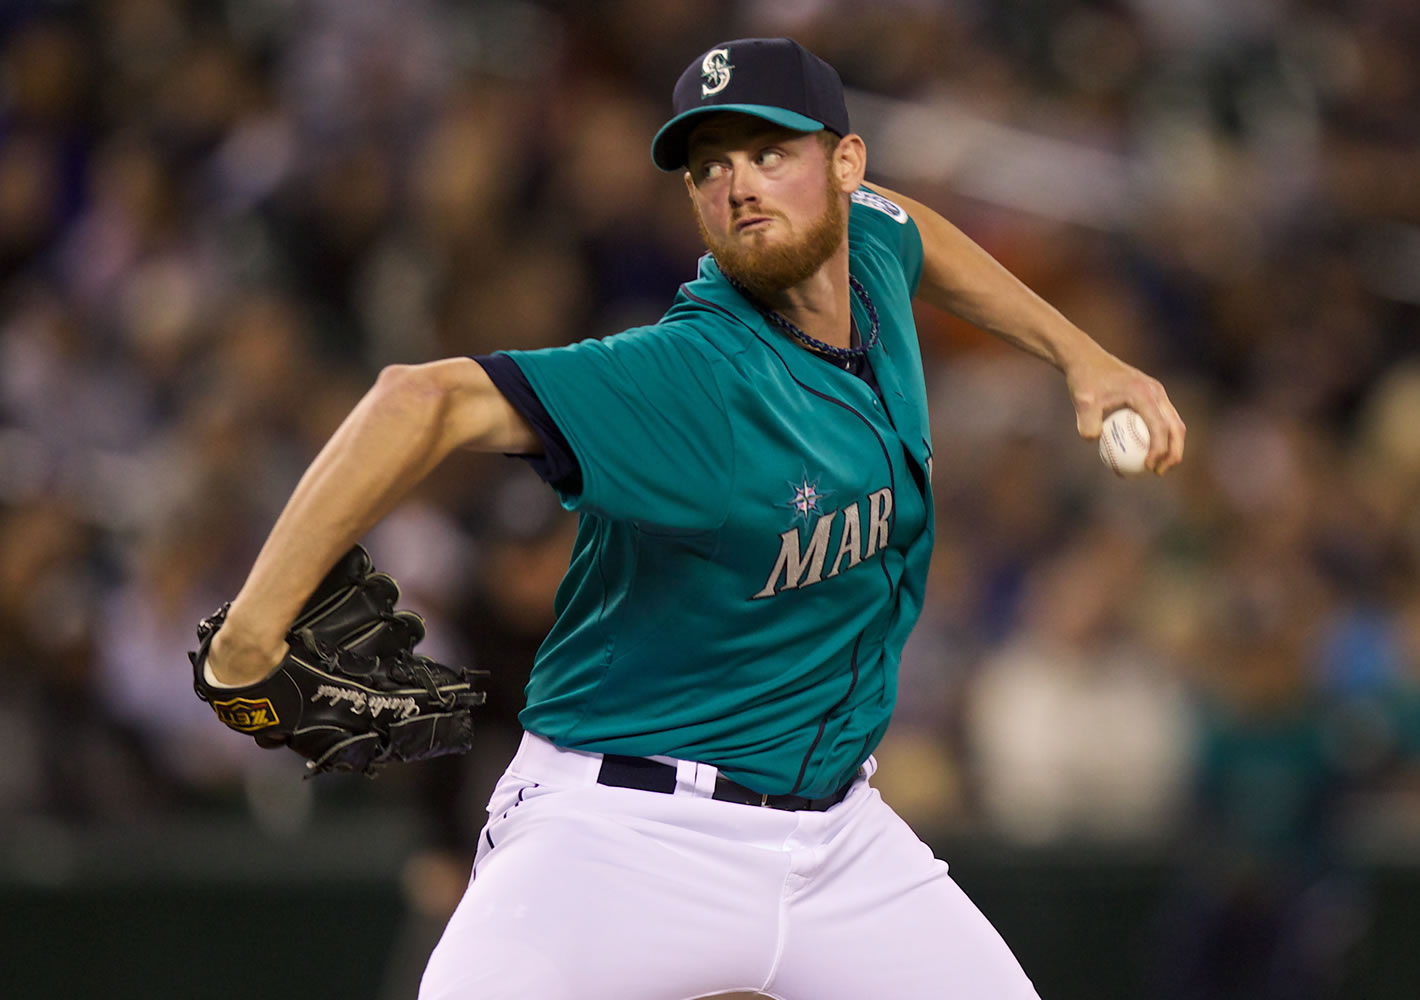 Seattle Mariners reliever Charlie Furbush delivers a pitch during the eighth inning of a game against the New York Yankees, Friday, June 7, 2013, in Seattle.